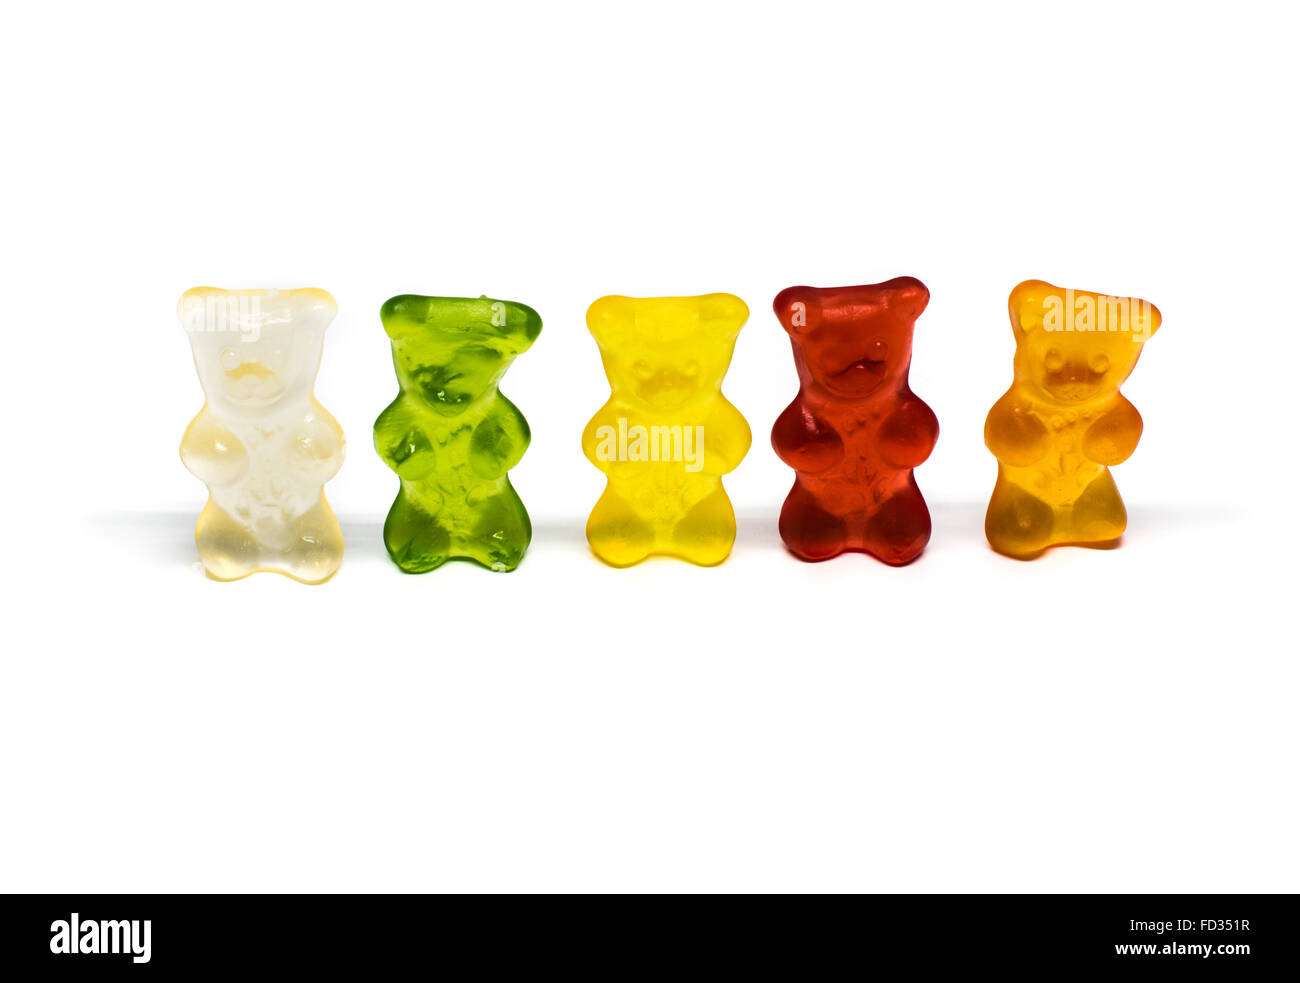 Funny gummy bears Banque D'Images